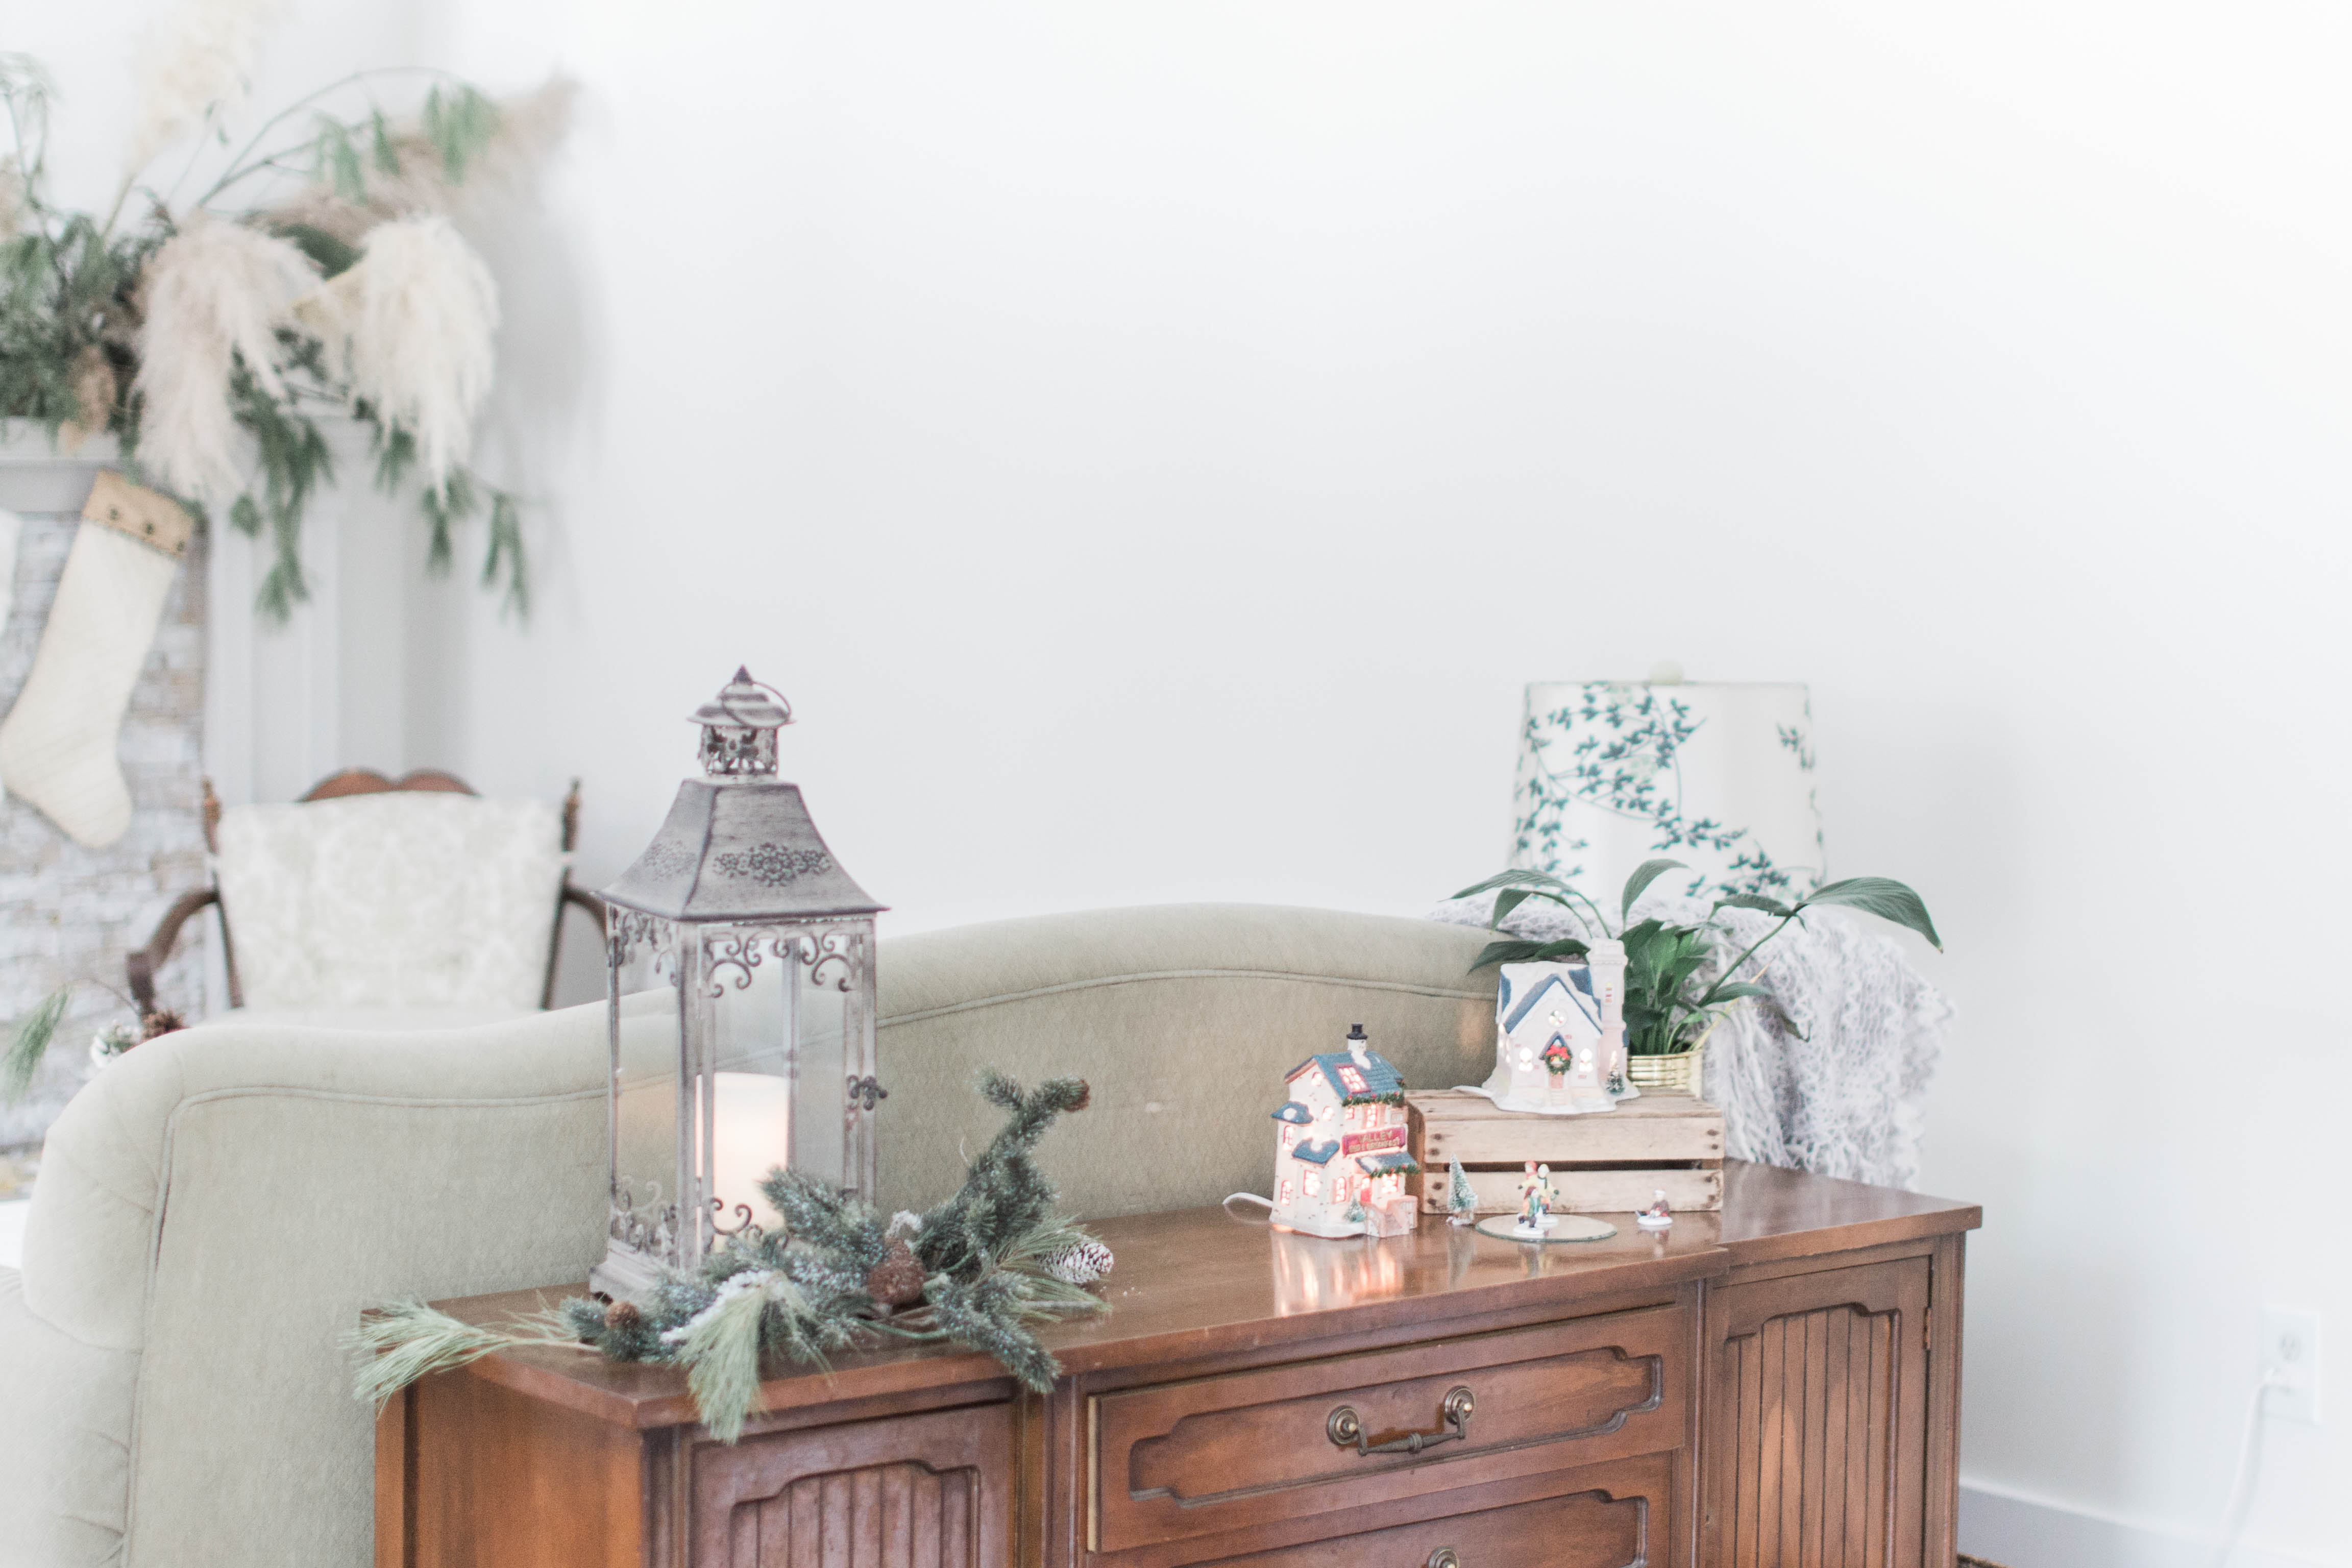 Nuetral Holiday Decor | The Day's Design